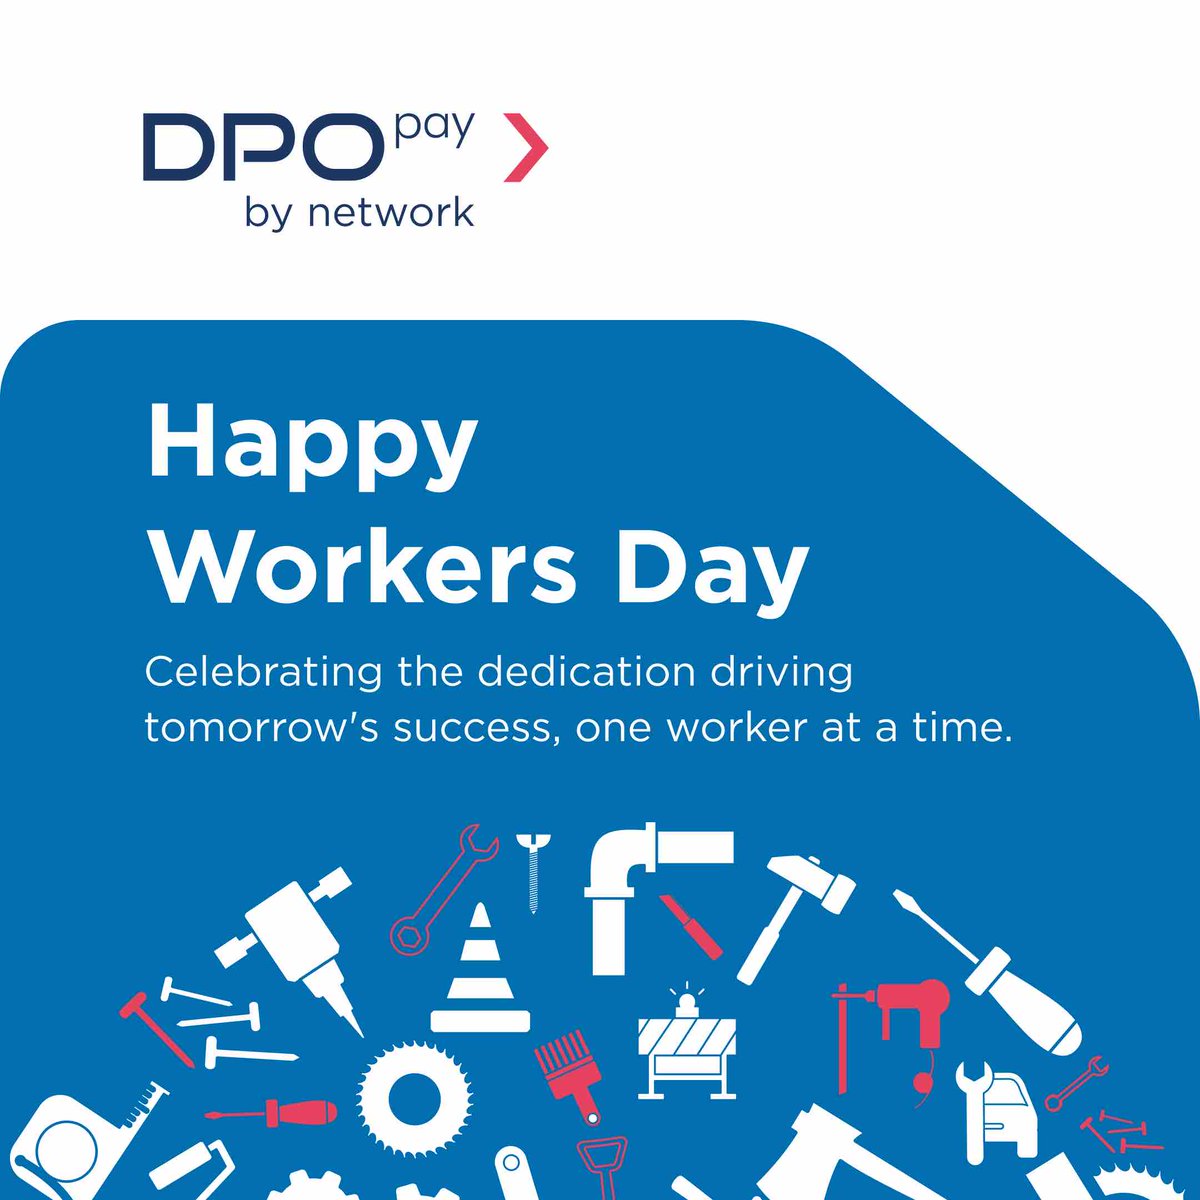 Today, we celebrate the tireless efforts and dedication of workers everywhere. We salute every individual’s hard work and dedication to building a better tomorrow. Happy Workers’ Day from DPO Pay by Network #DPOPaybyNetwork #NetworkInternational #WorkersDay